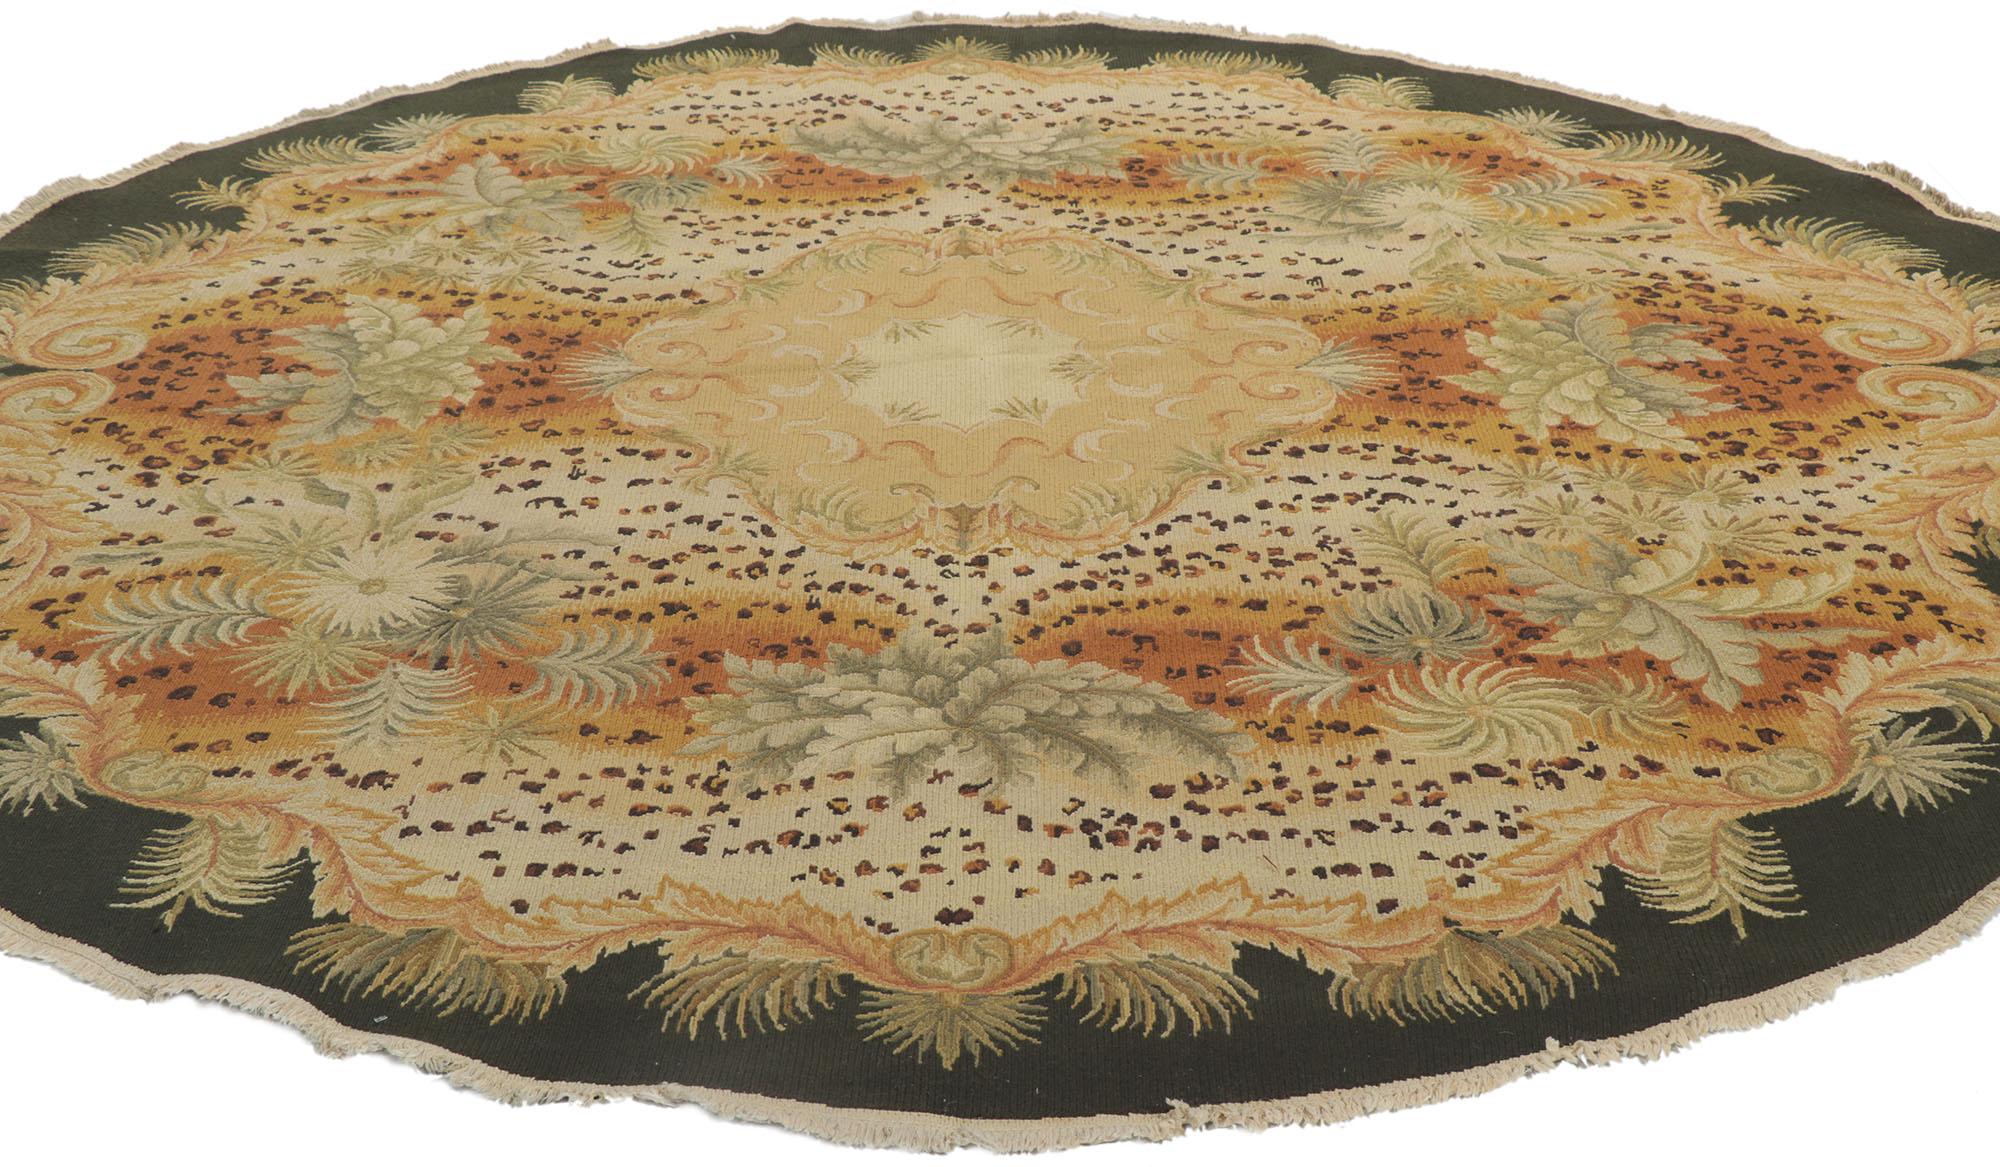 78164 Vintage Indian chain stitch round area rug, 08'00 x 08'03. Reminiscences of an exotic journey and worldly sophistication, this vintage chainstitch rug is a captivating vision of woven beauty. The abrashed field features a central medallion